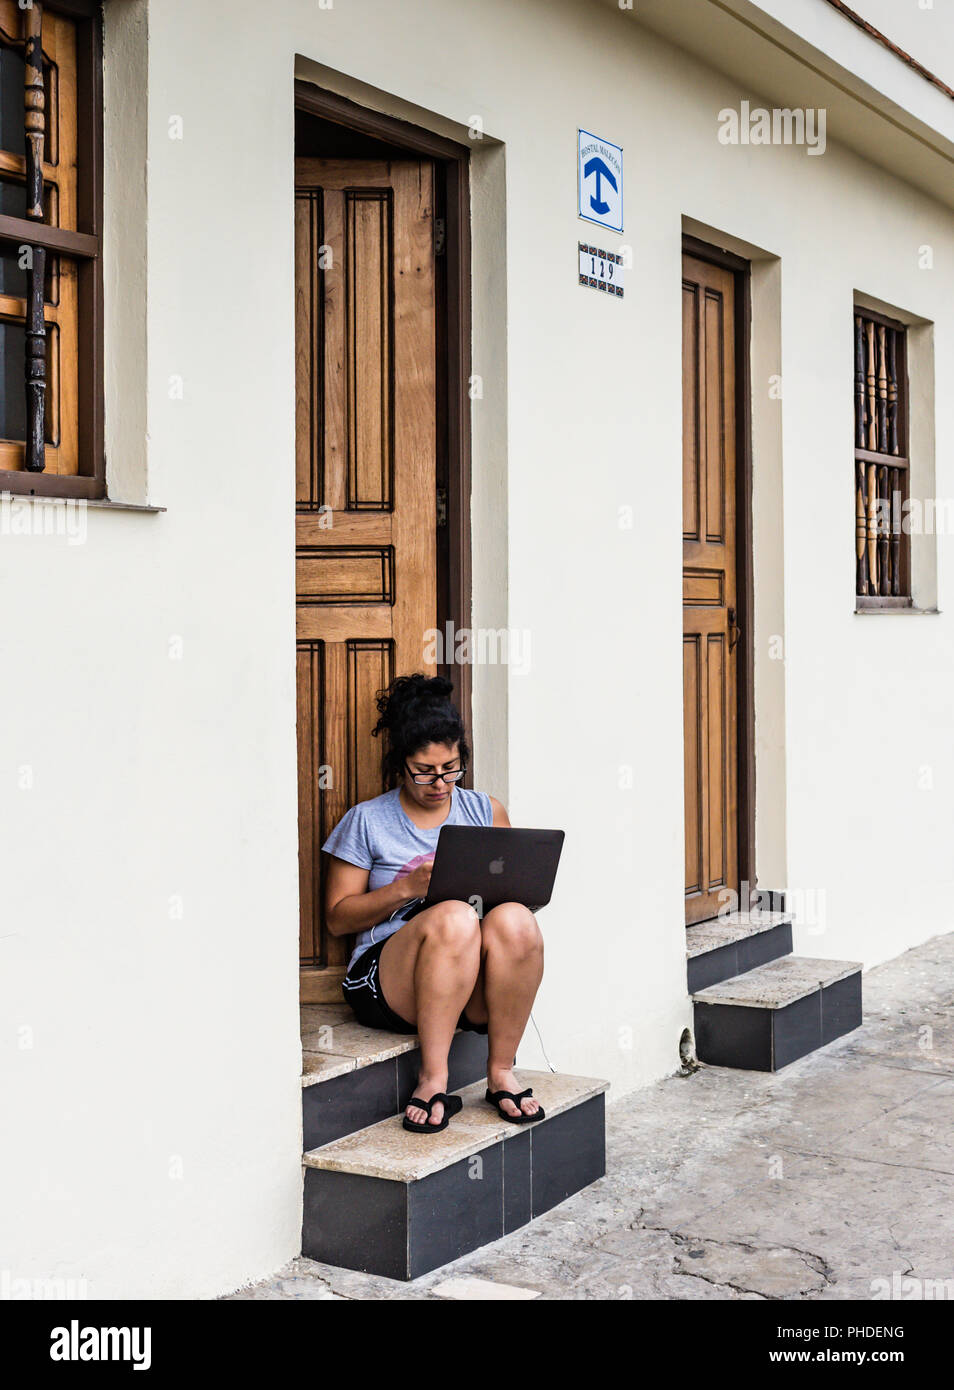 Havana, Cuba / March 21, 2016: Although Cuba has limited wifi connectivity, a woman works on a laptop at a hostel doorstep. Stock Photo